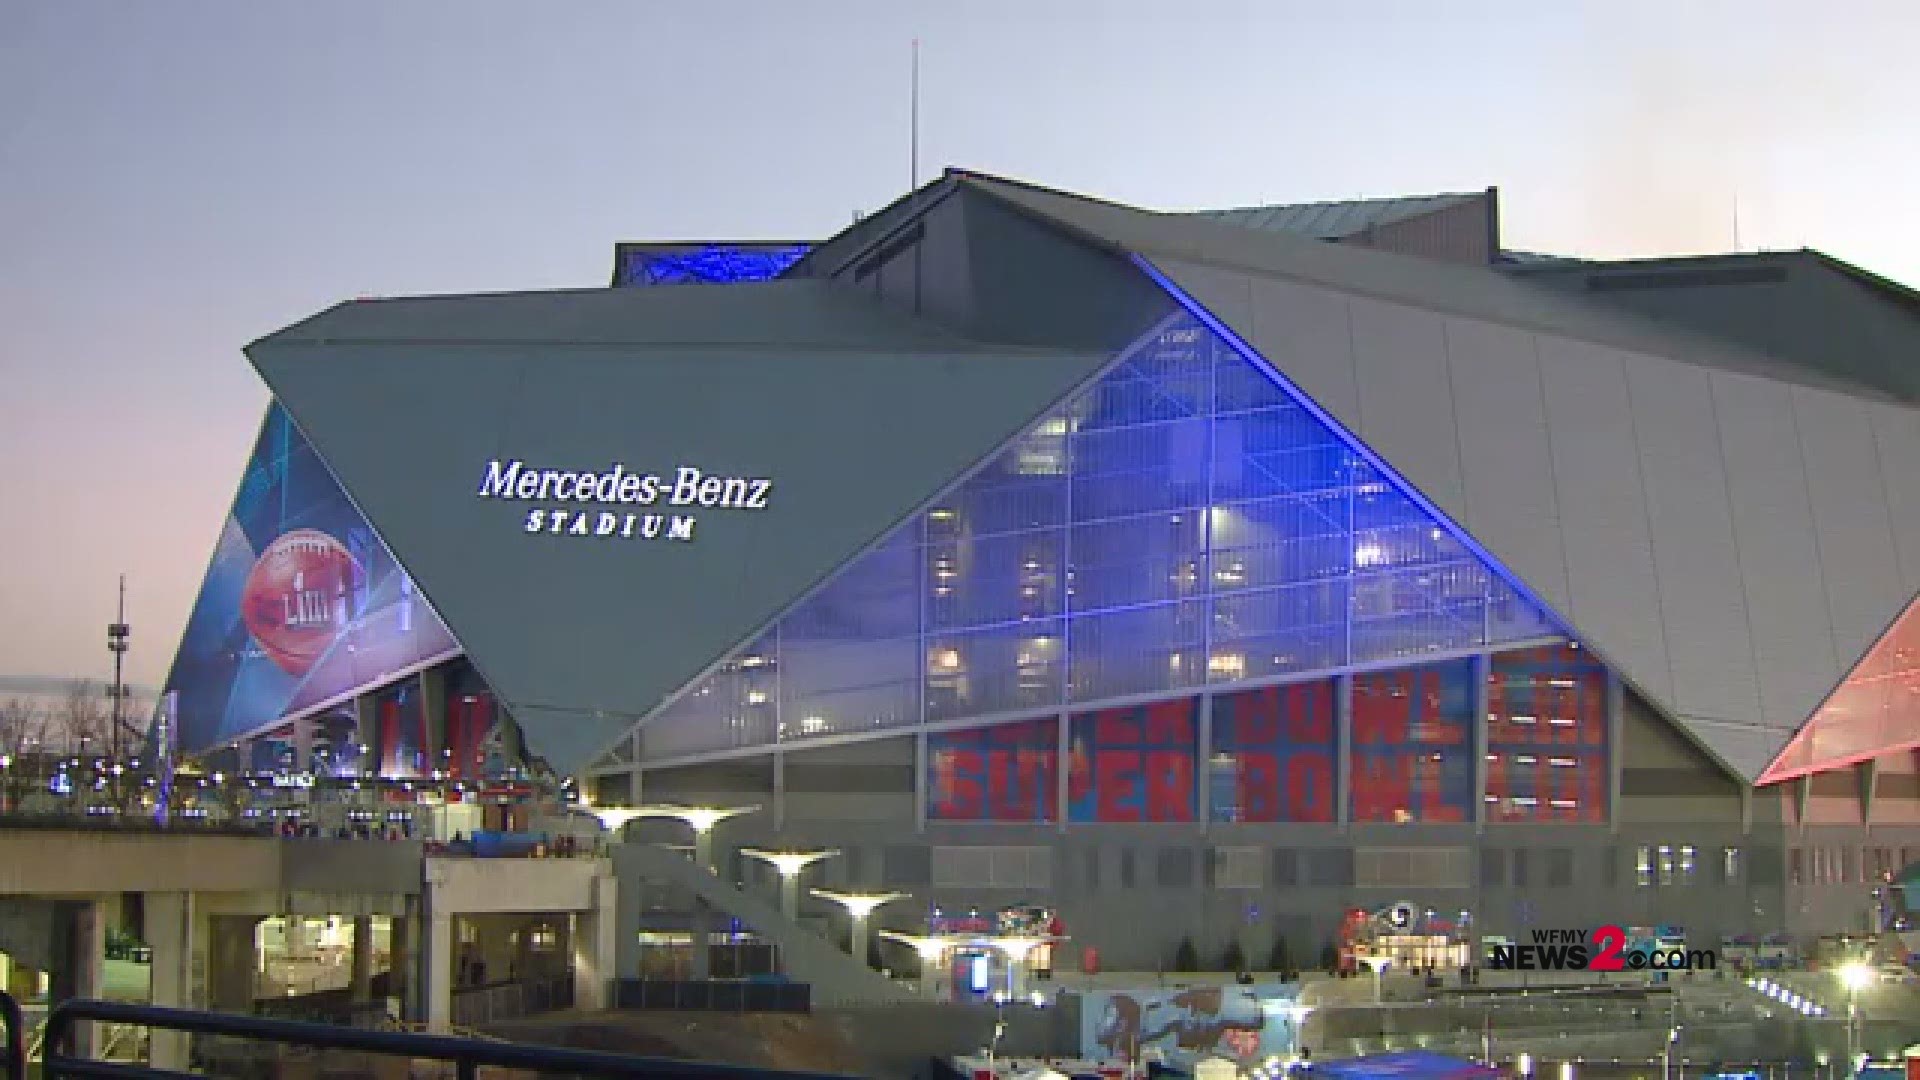 Open and close sesame! Mercedes-Benz Stadium closes its gigantic retractable roof ahead of Super Bowl 53 kickoff. The roof has eight petals that weigh 500 tons each and can open and close in eight minutes.